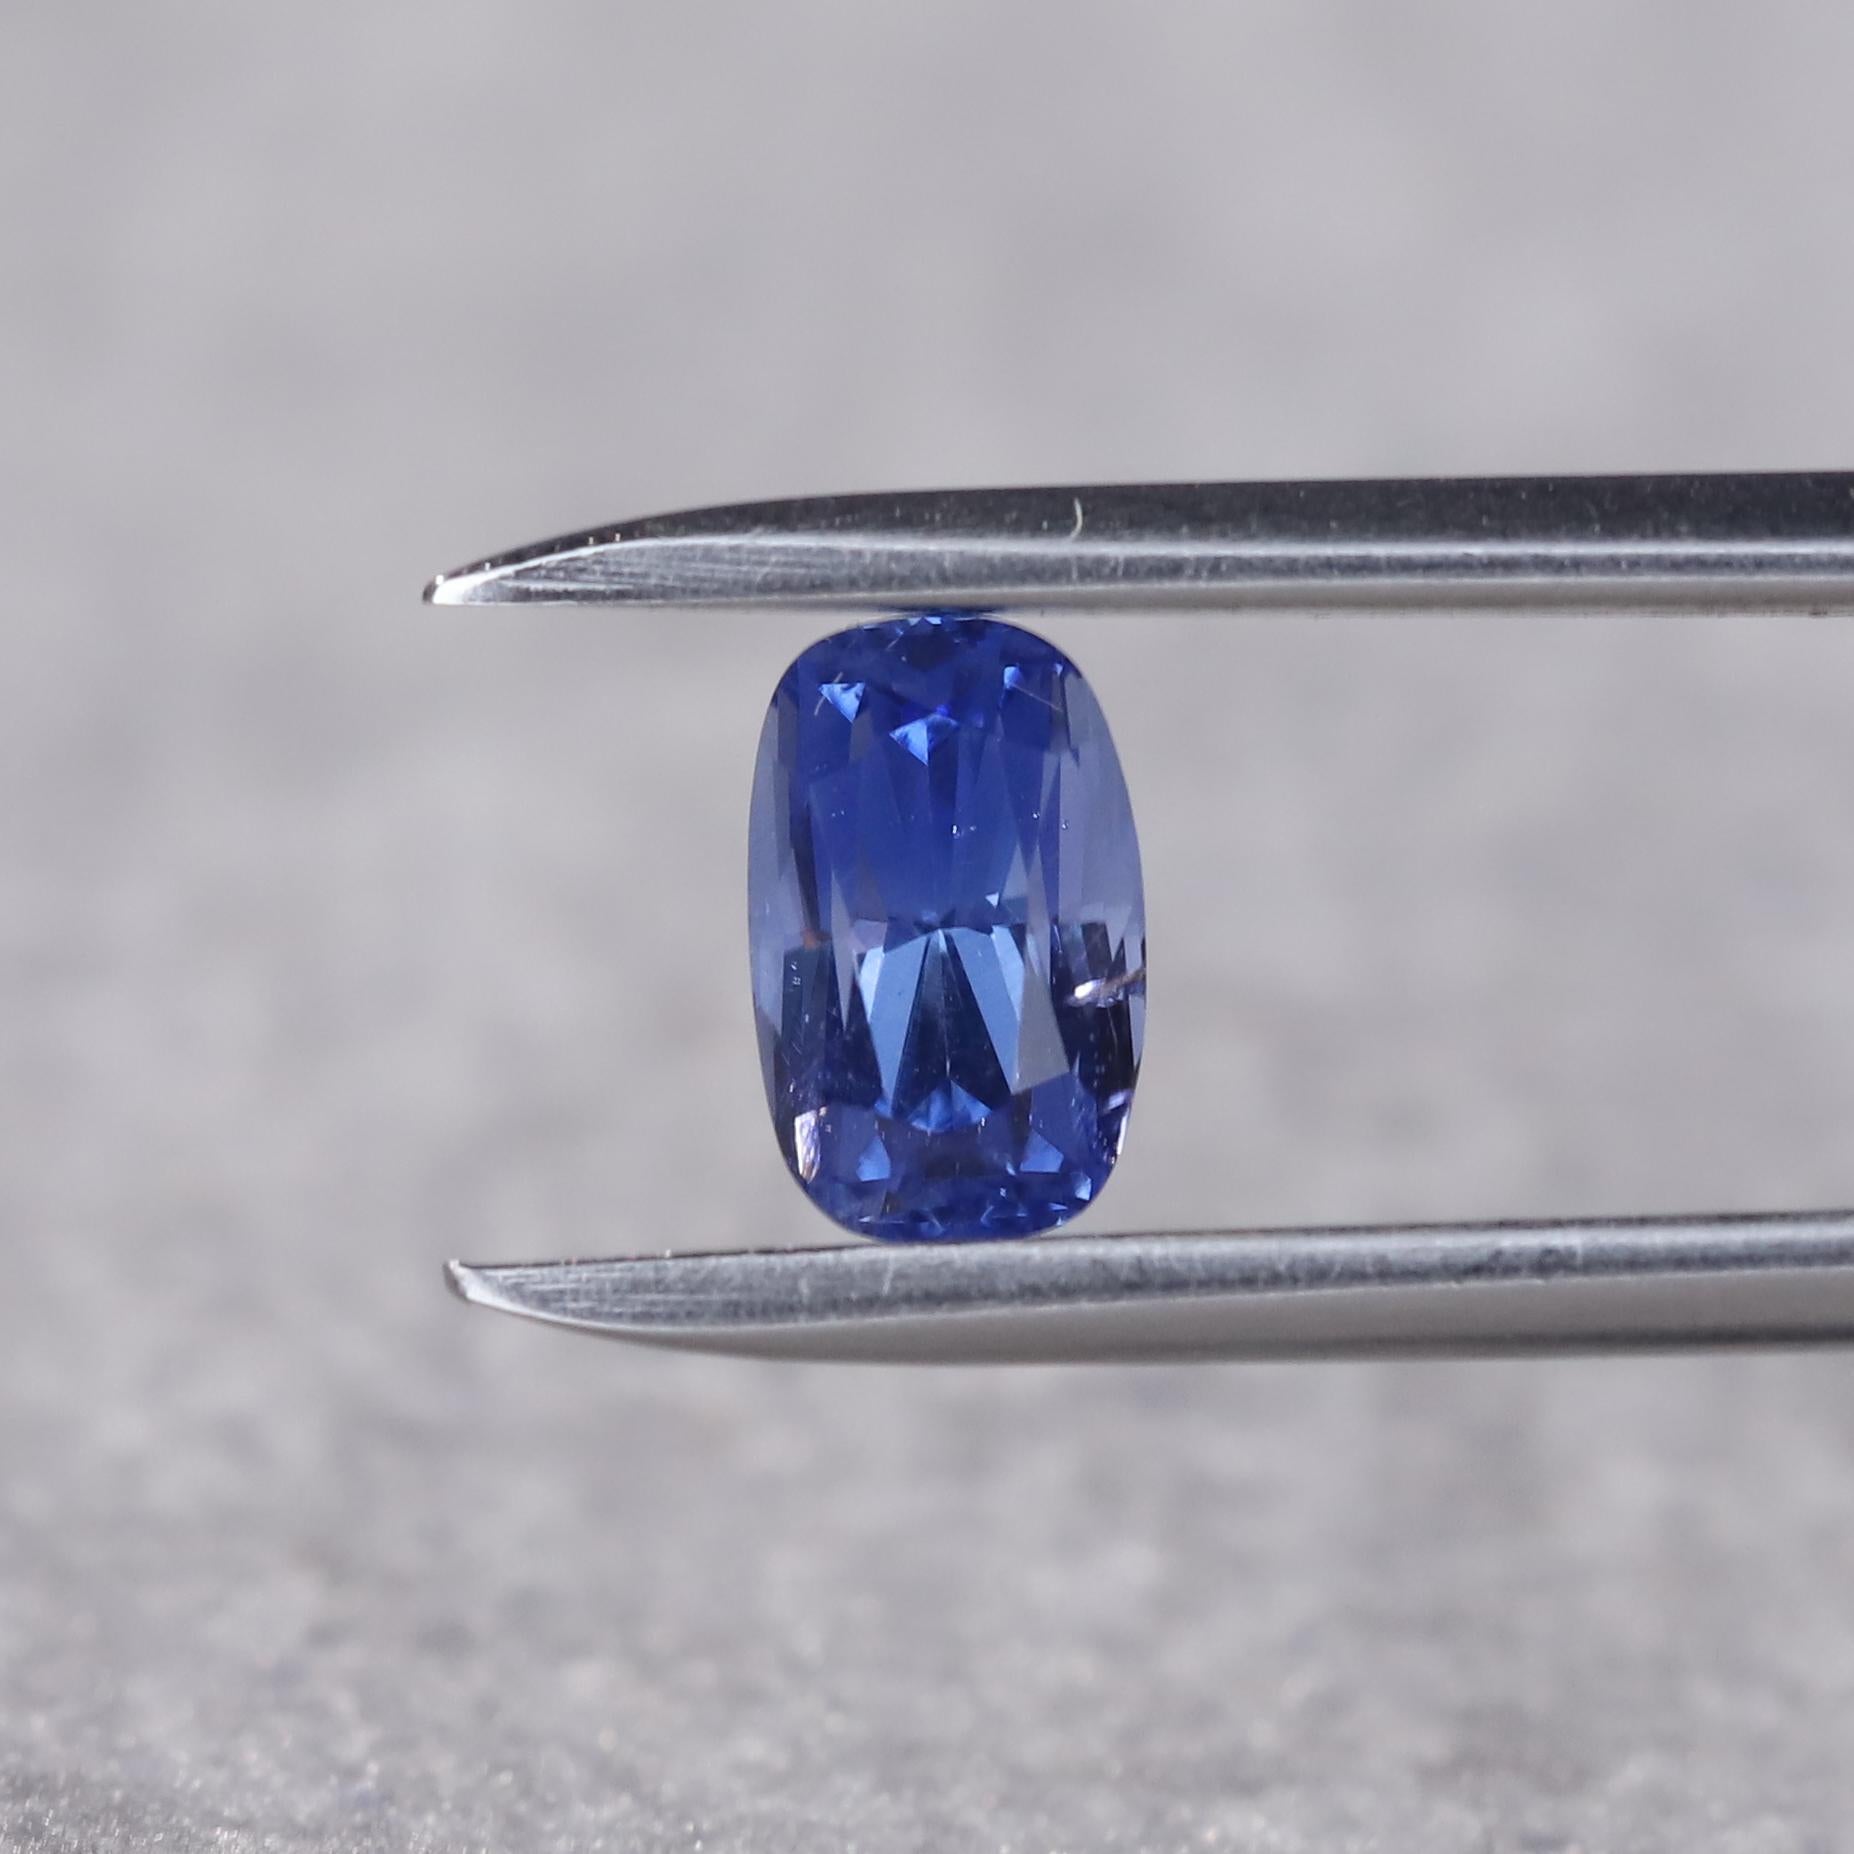 Blue sapphires come in a myriad of hues, each with its unique charm and distinctive beauty. Some tones of blue, like the medium-deep cornflower color of this natural sapphire are like portals to the cosmos. Surreal and breathtaking. Fashioned into a